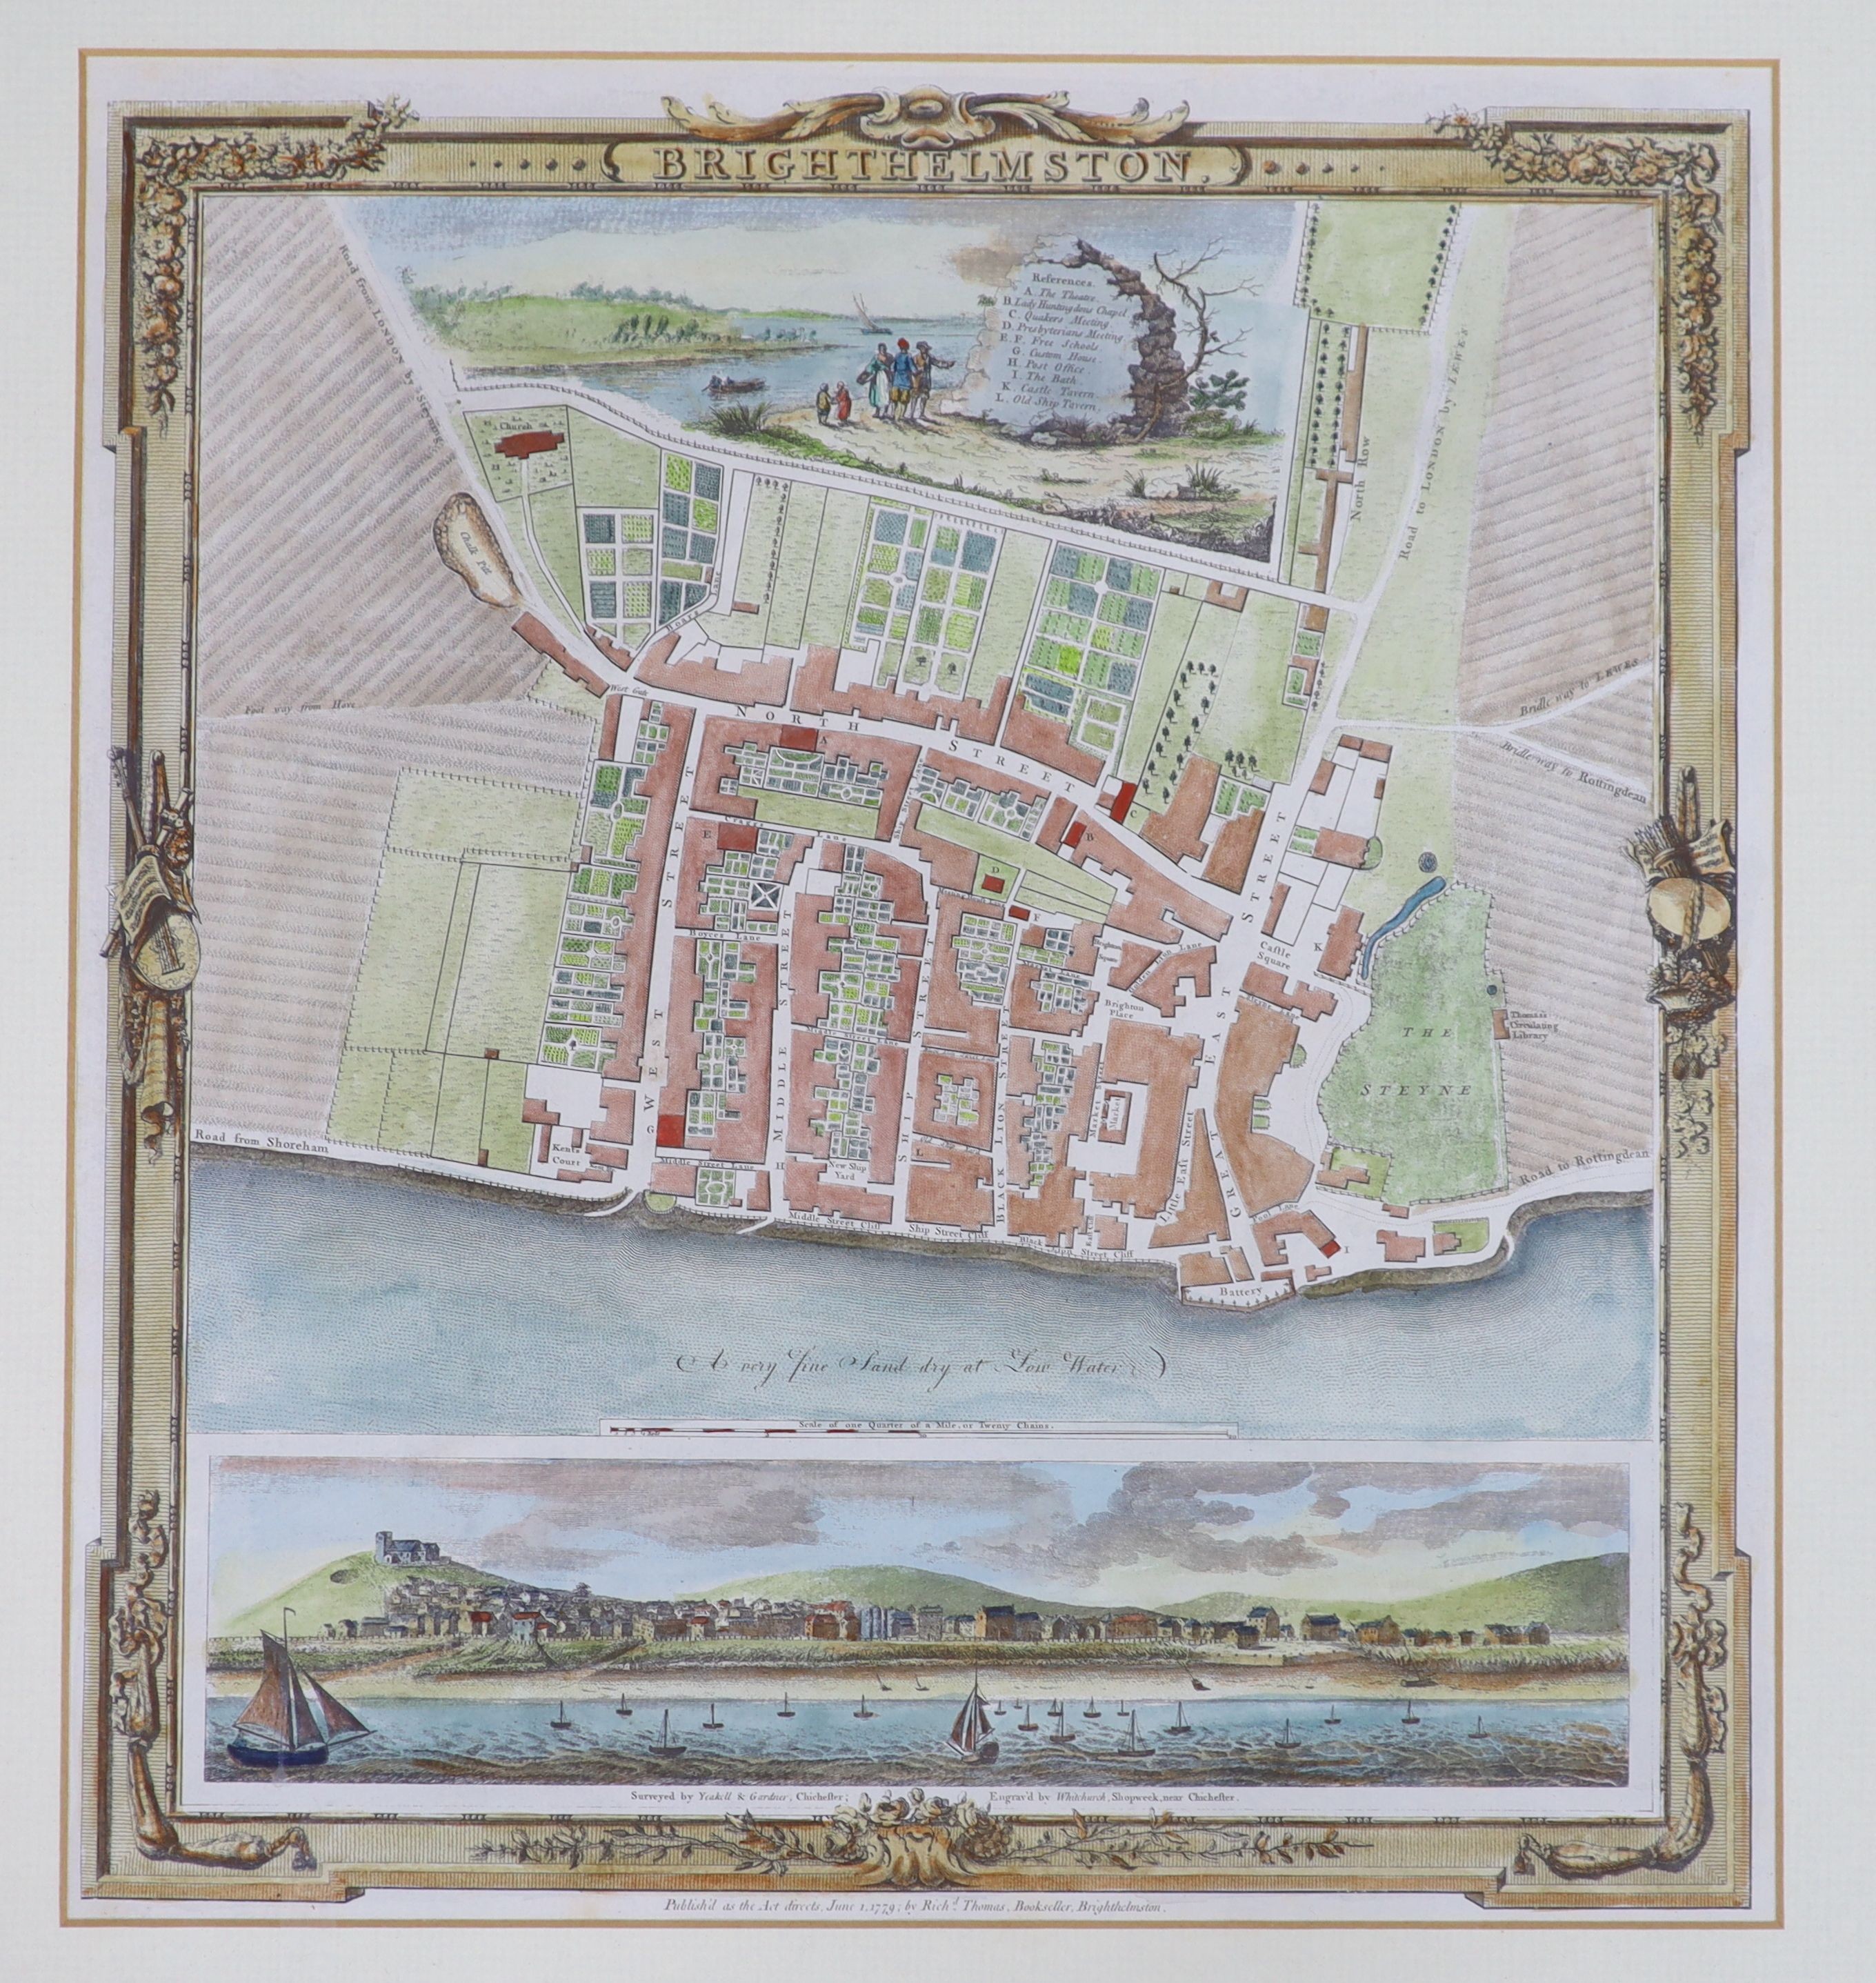 Brighthelmston map by Thomas Yeakell and William Gardner, published June 1, 1779, 34 x 31cm